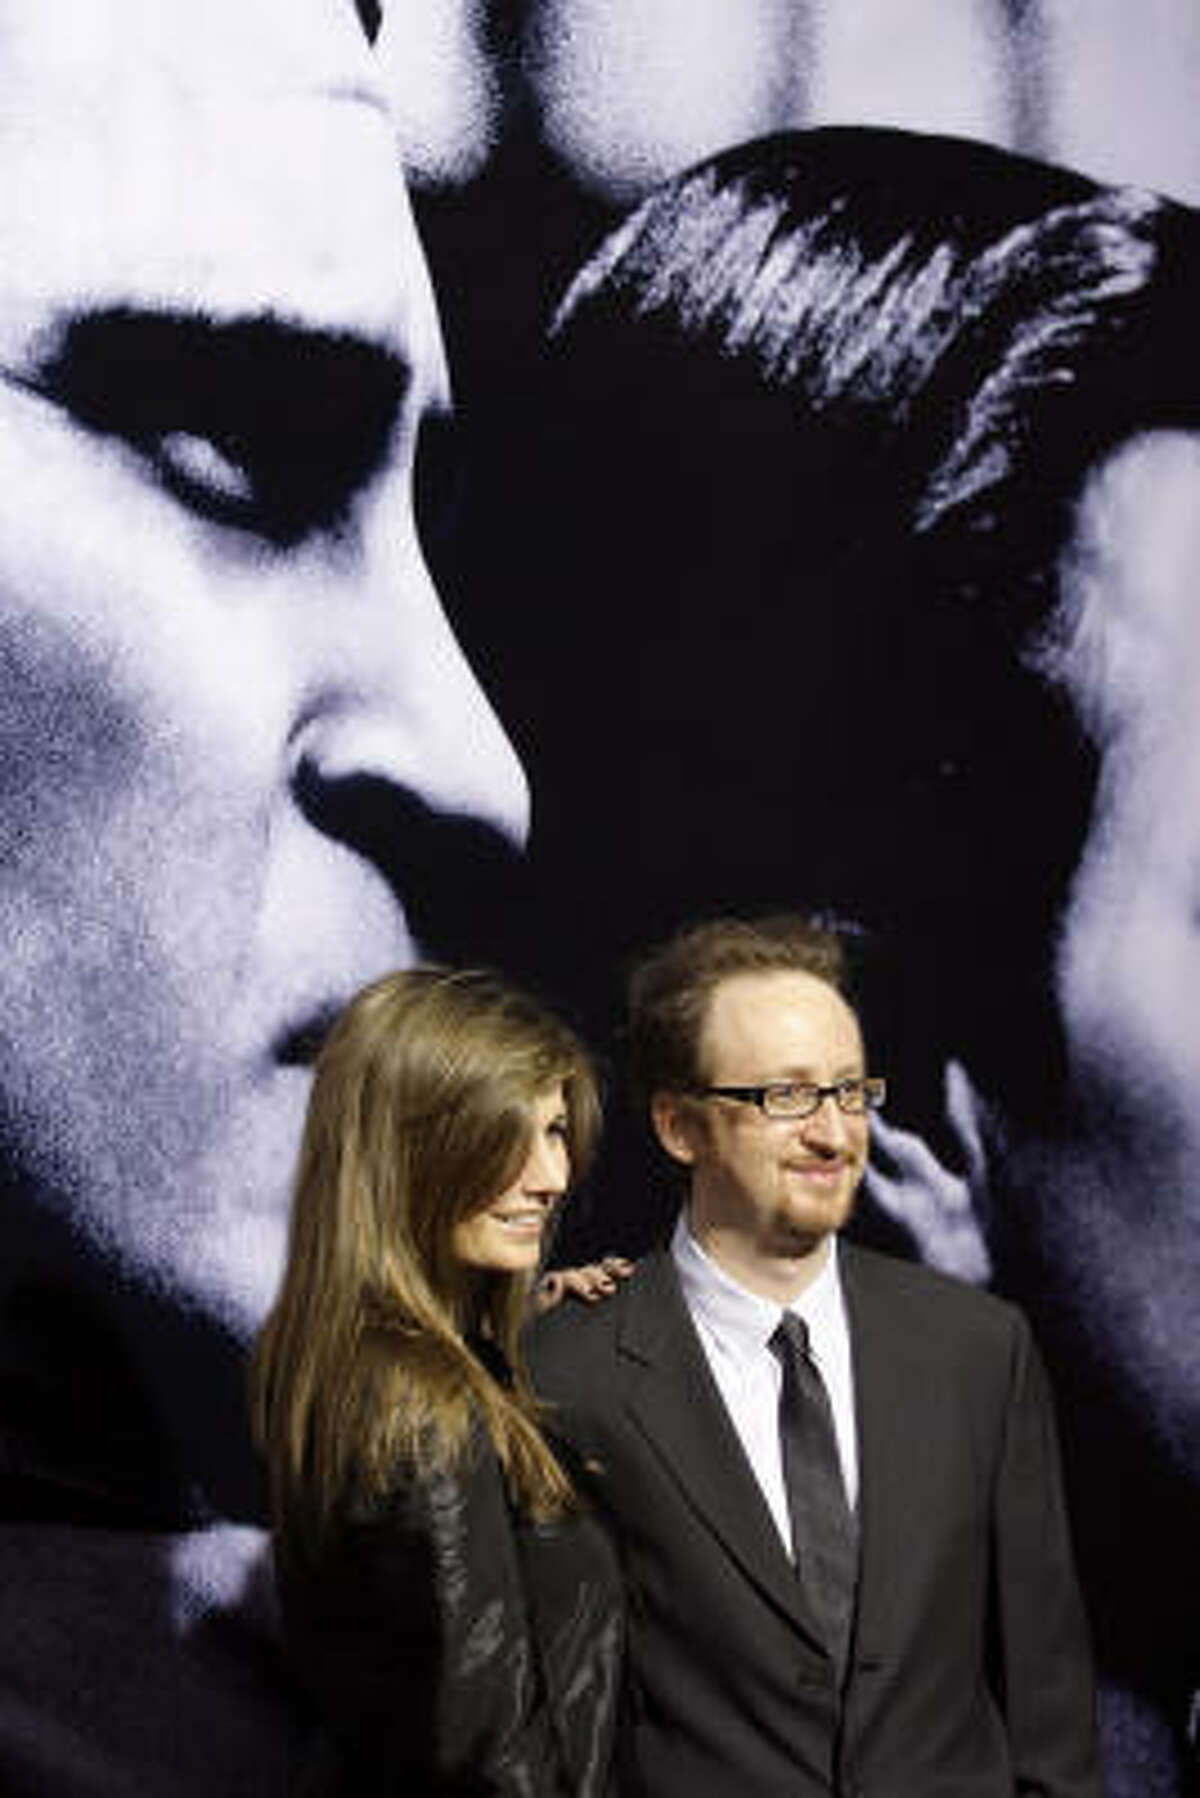 Film director James Gray and his wife Alexandra